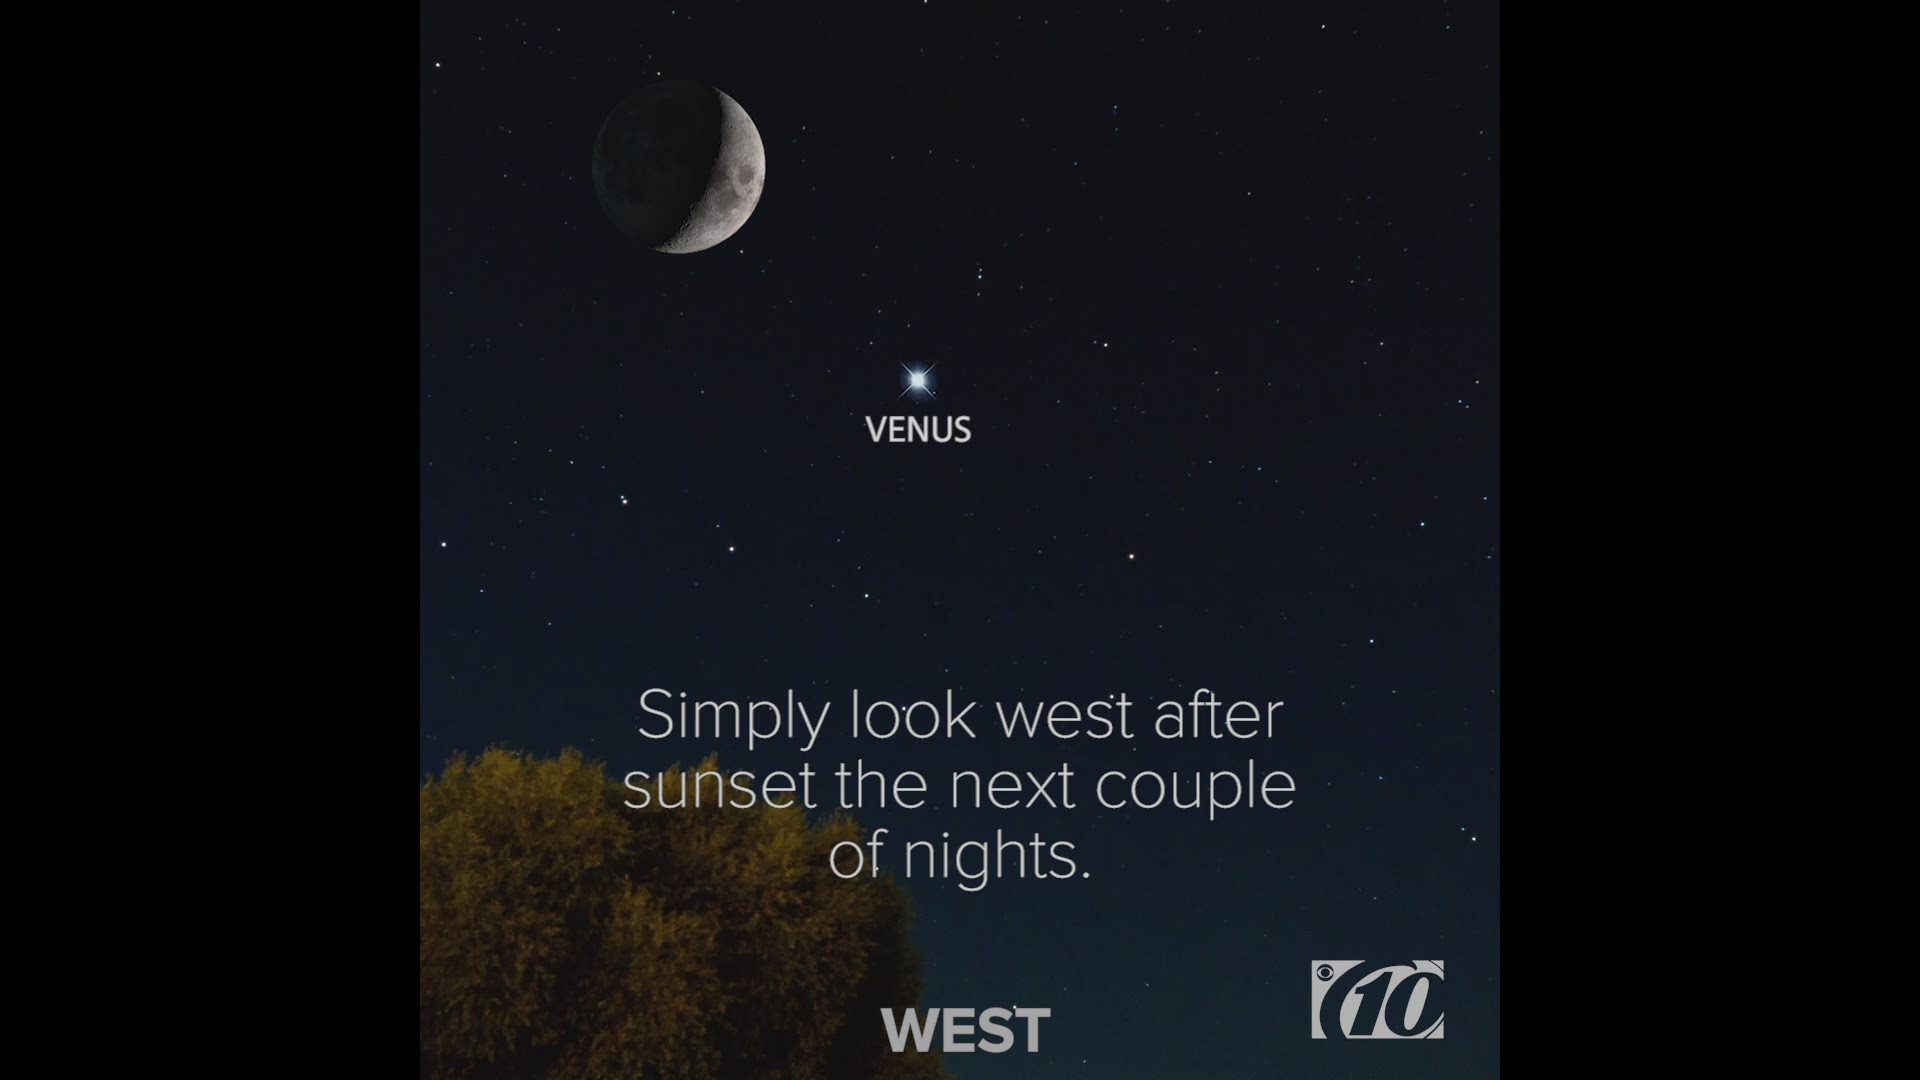 Look in the western sky after sunset tonight to see the very bright Venus and the waxing crescent Moon appear next to each other.